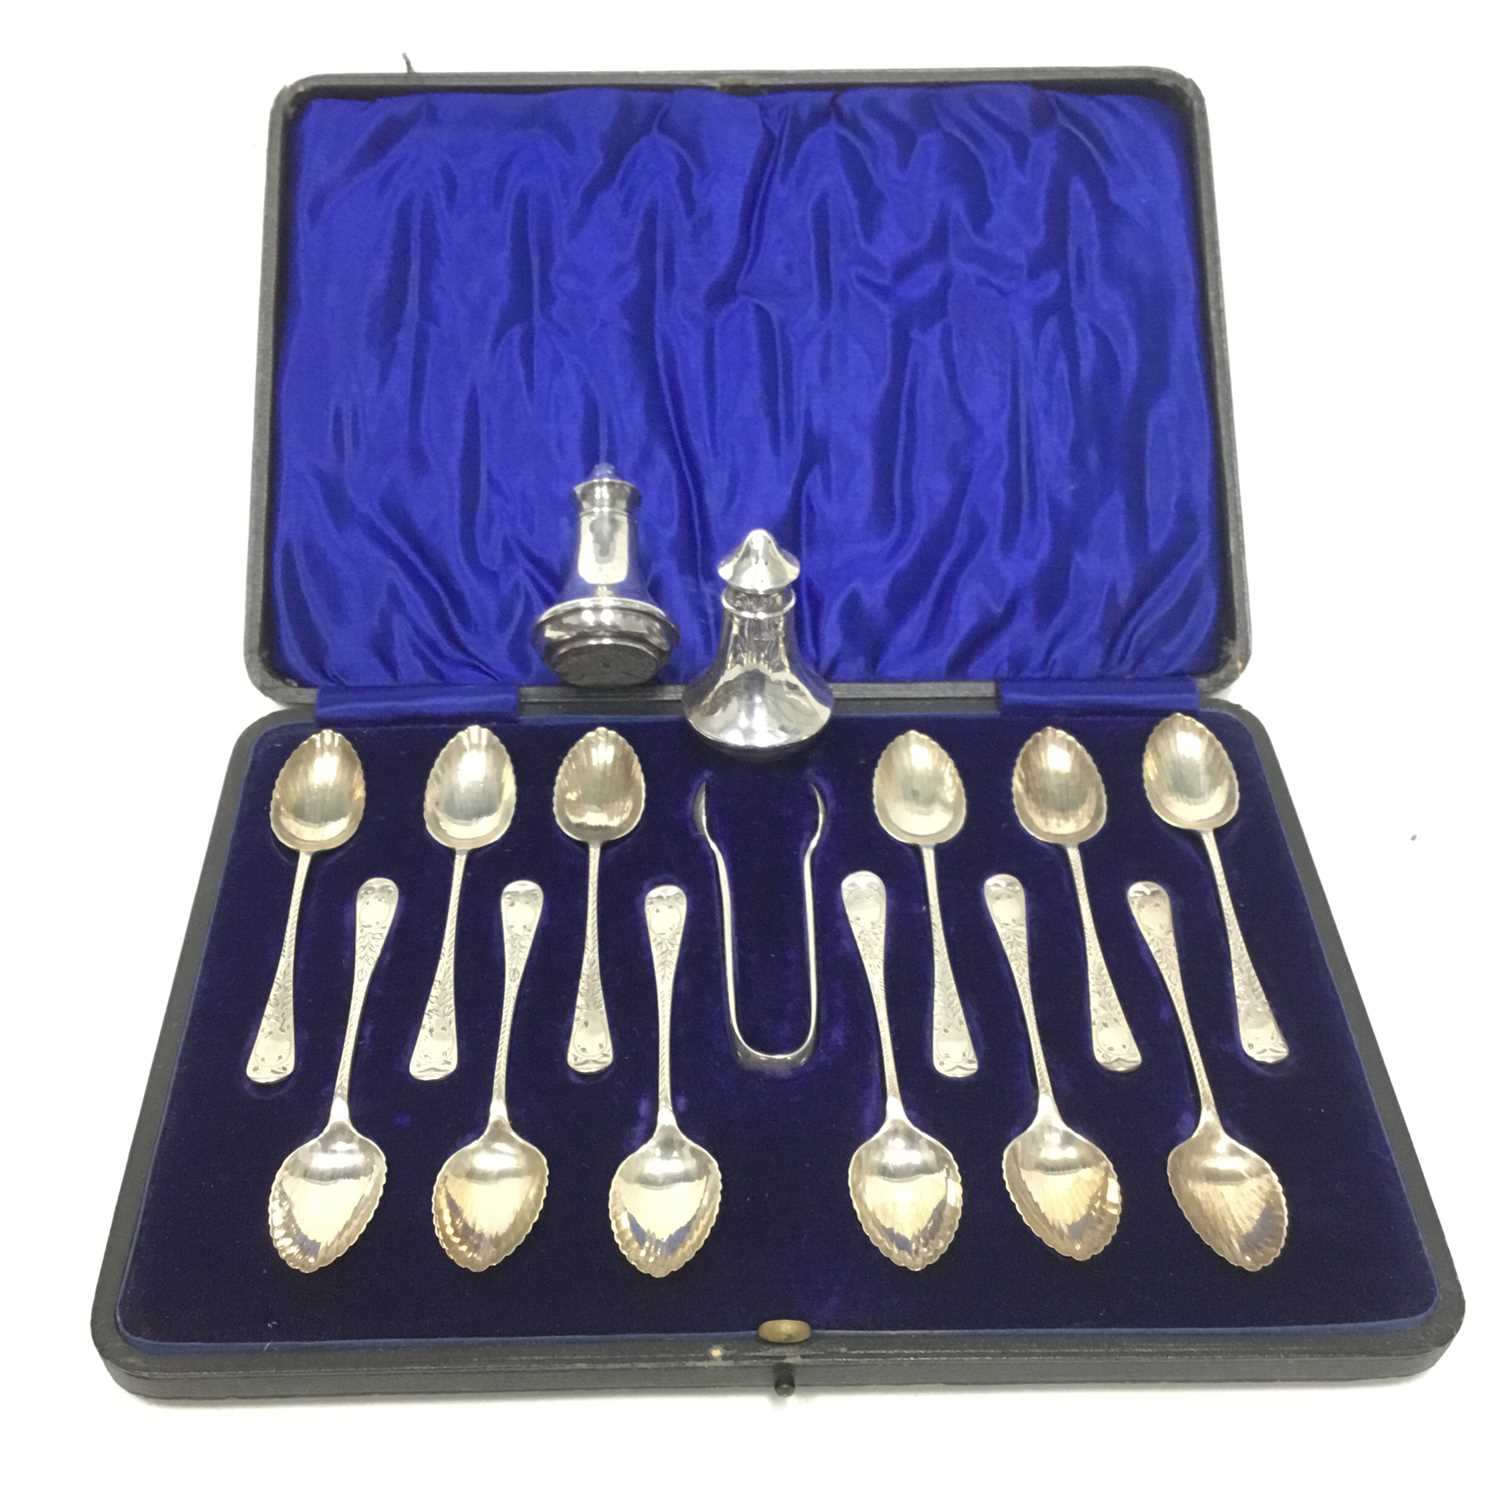 Lot 807 - A CASED SET OF SILVER TEASPOONS AND TONGS ALONG WITH TWO SHAKERS